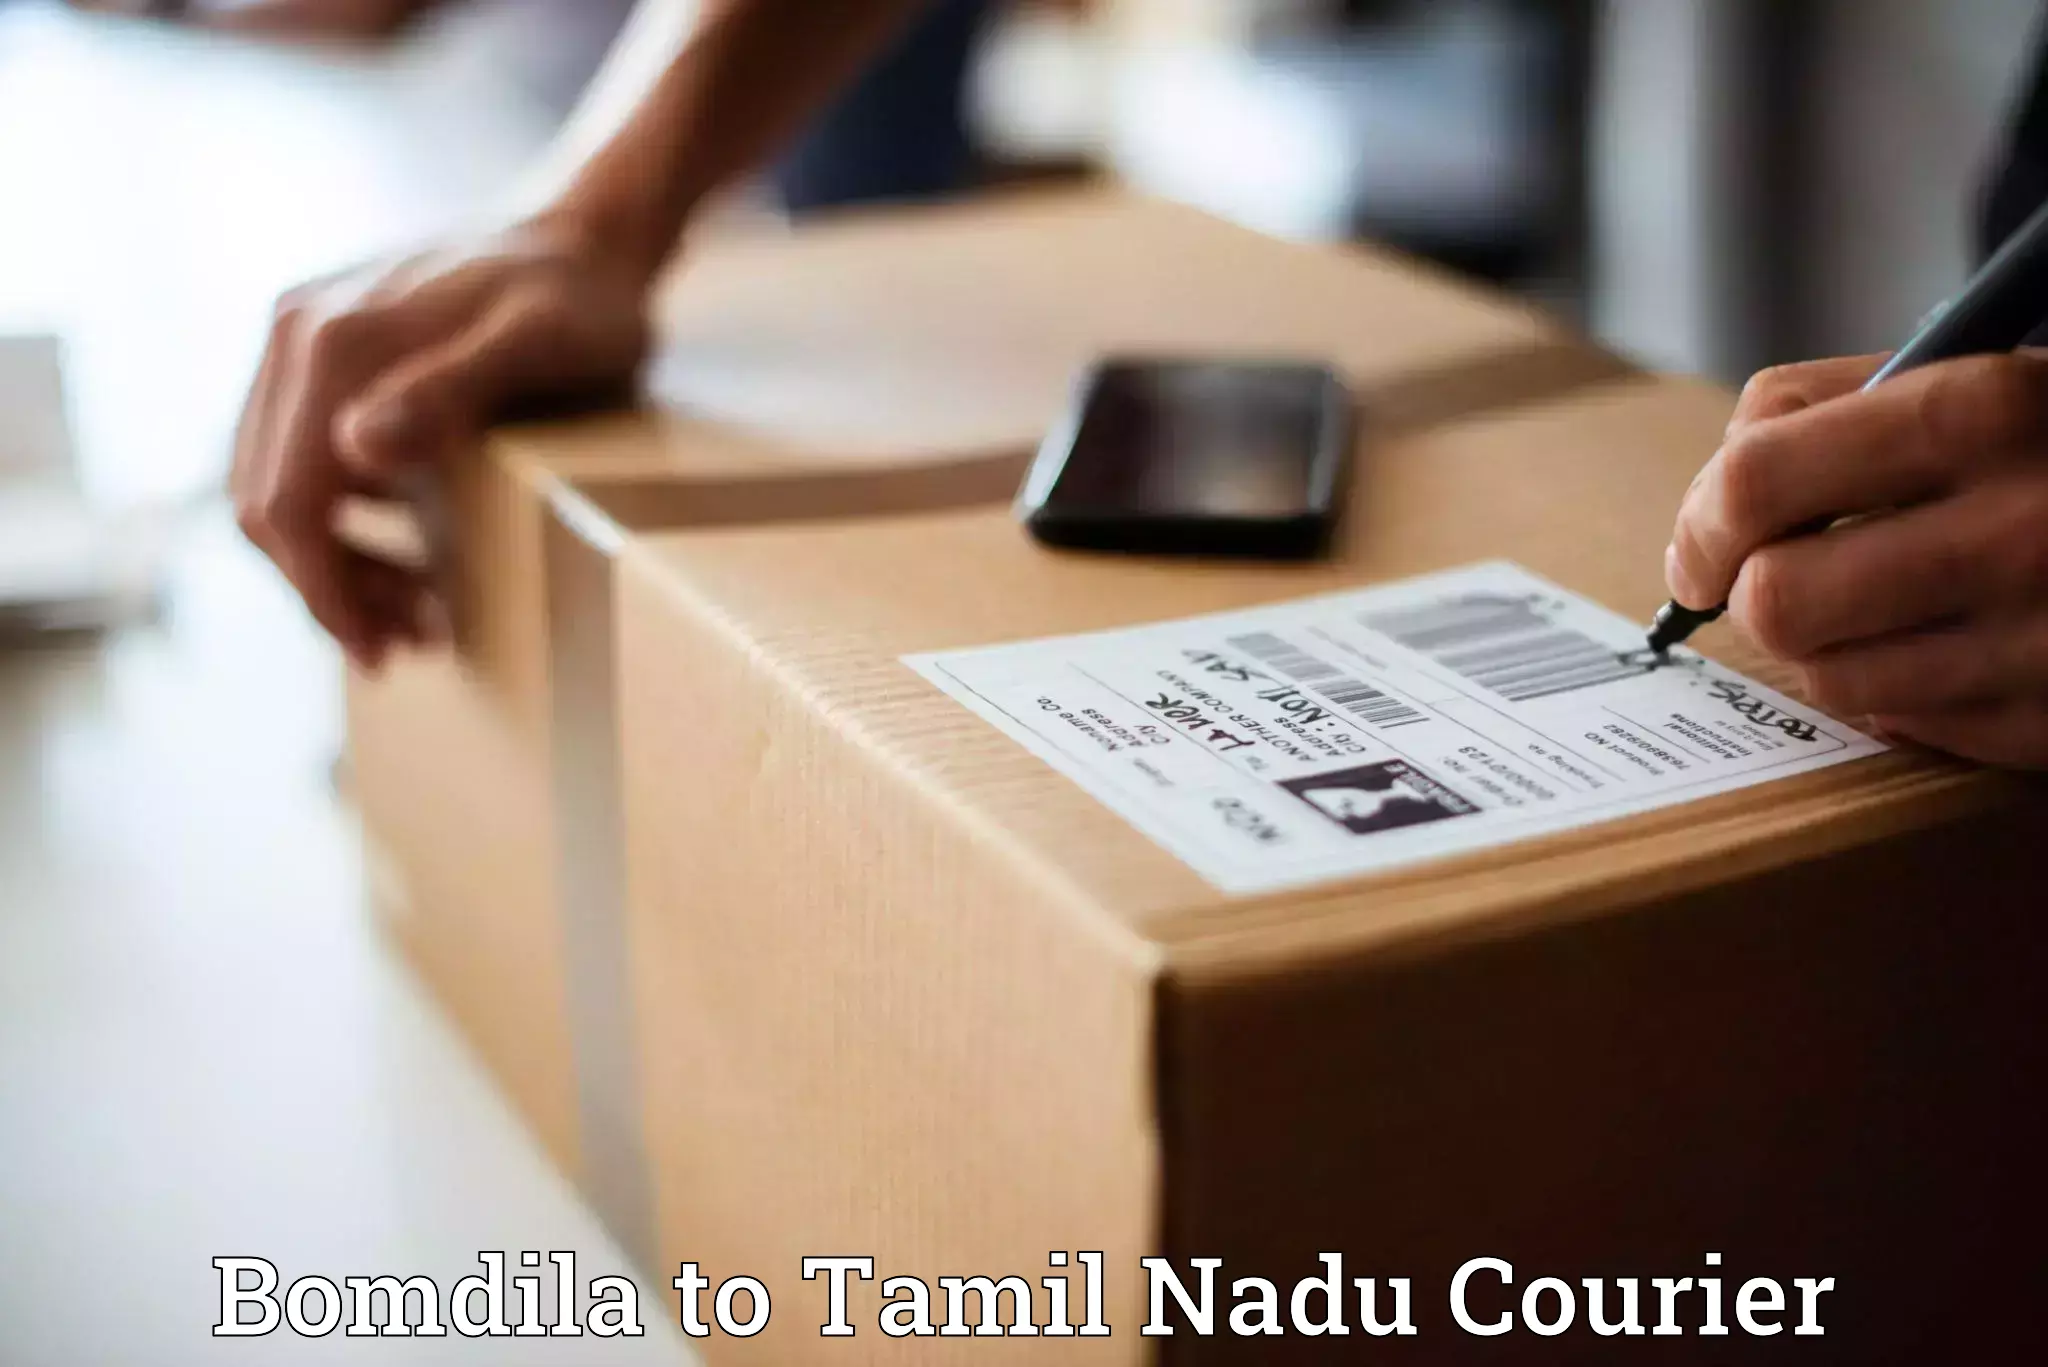 Reliable delivery network Bomdila to Ayyampettai